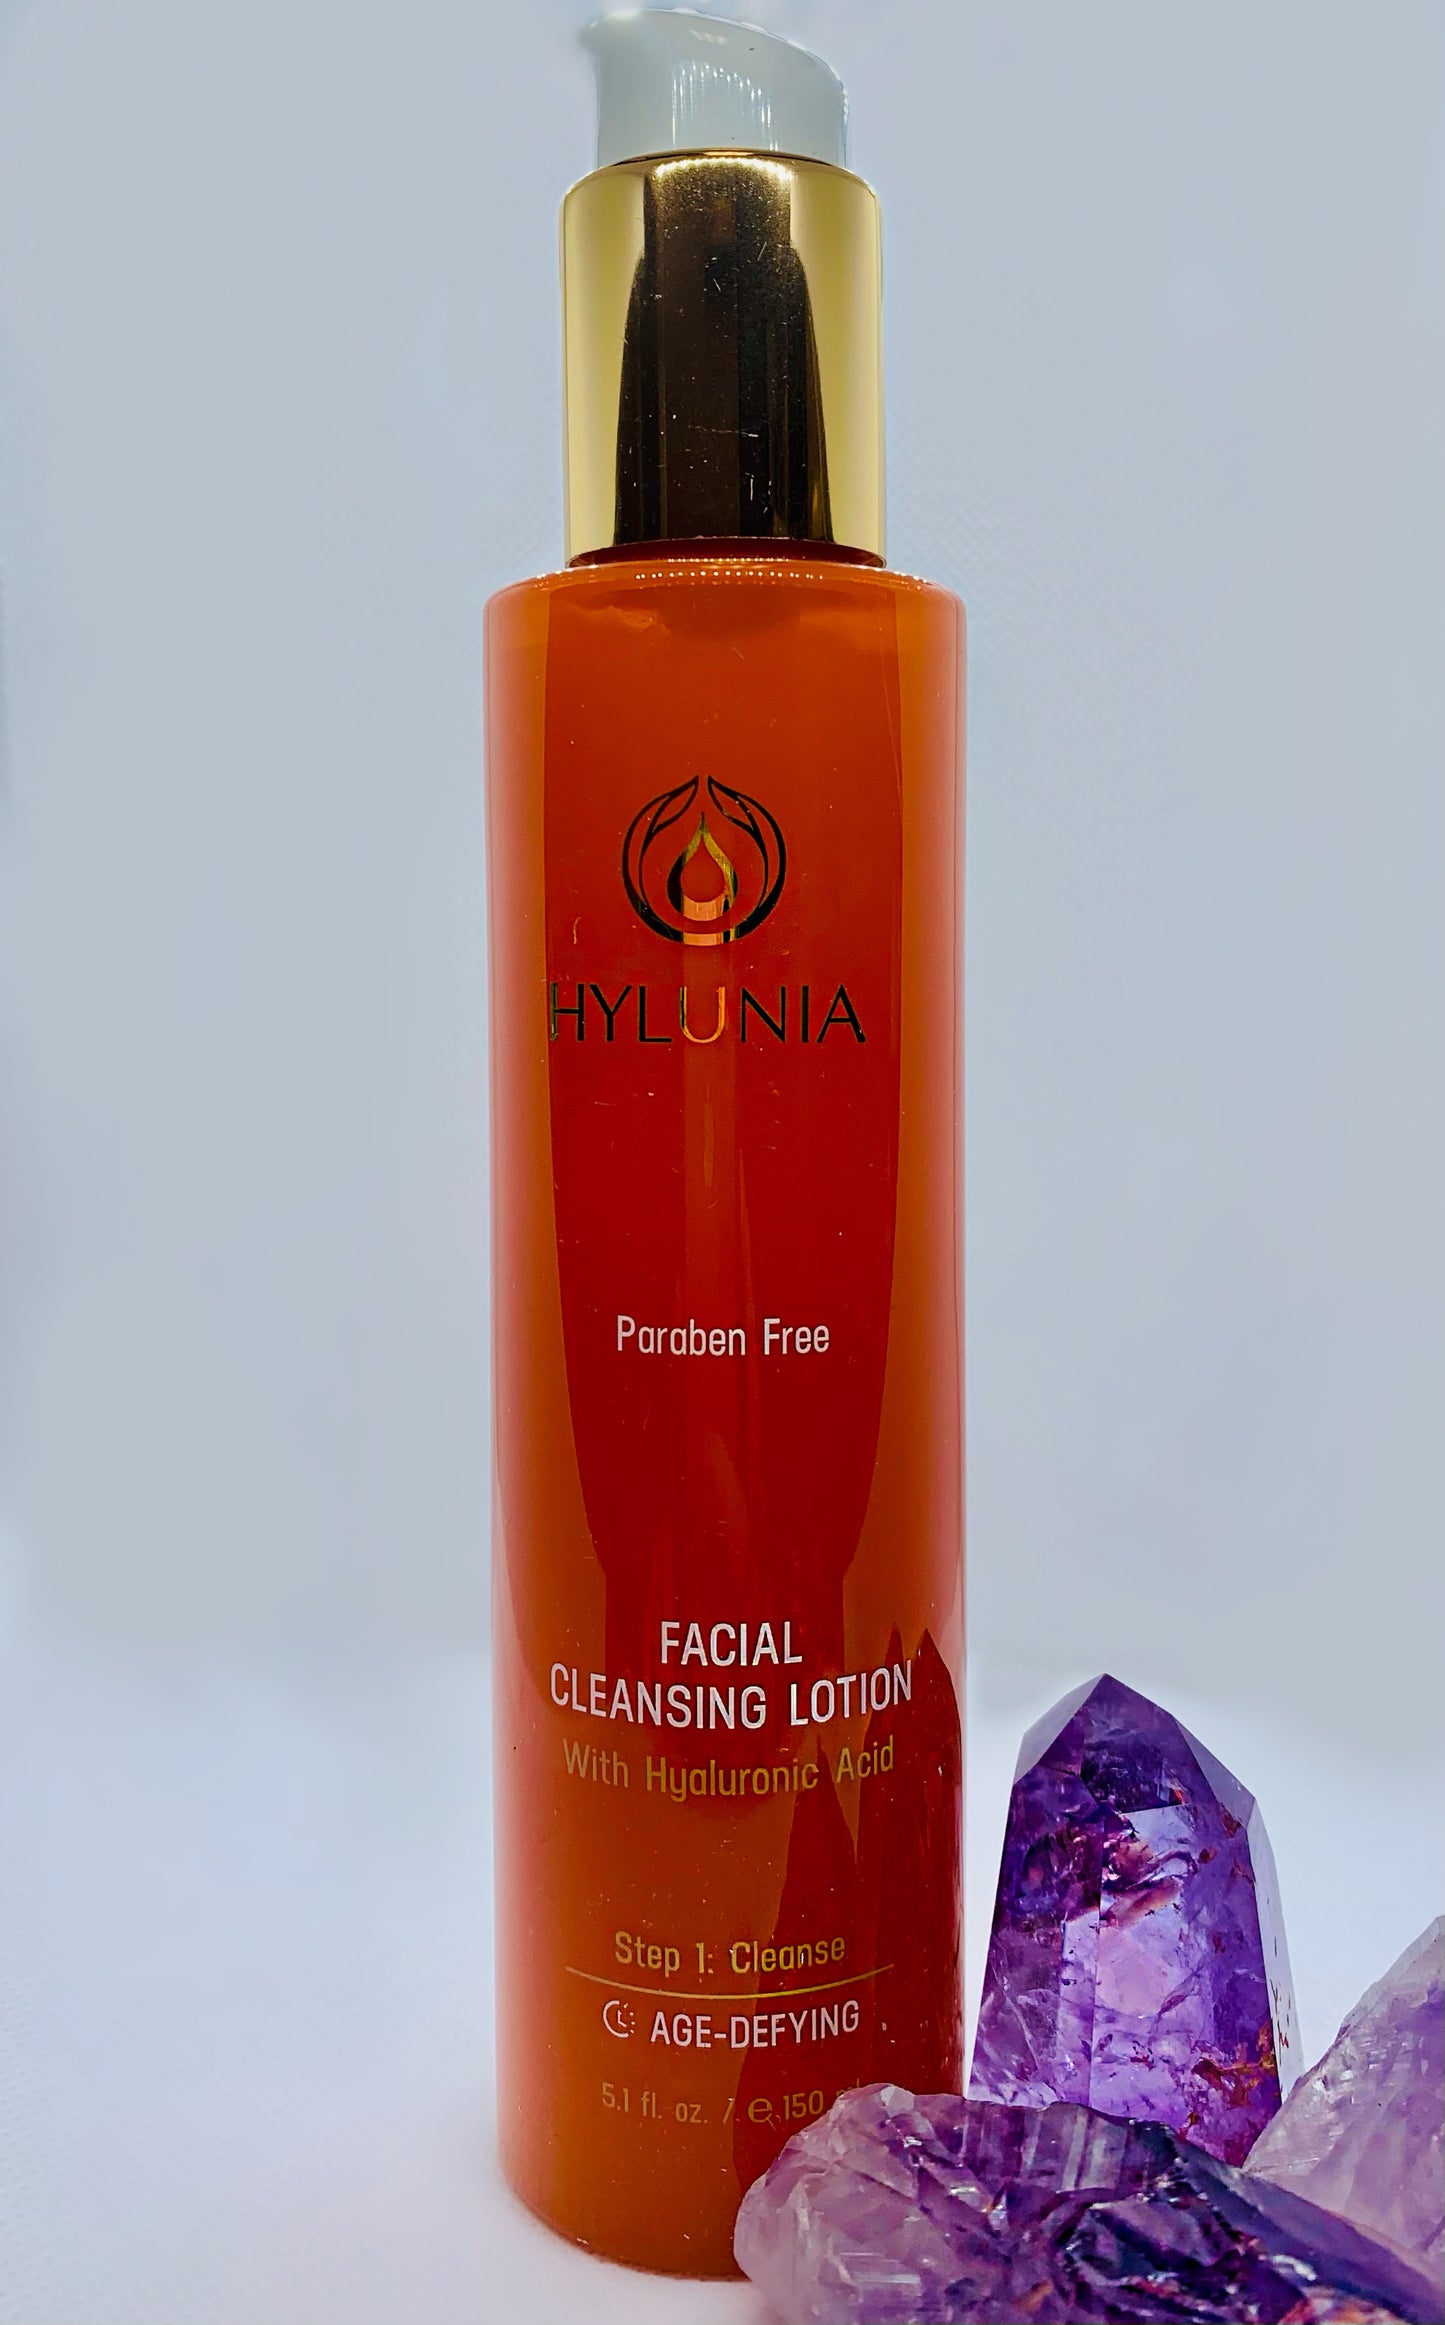 Facial Cleansing Lotion